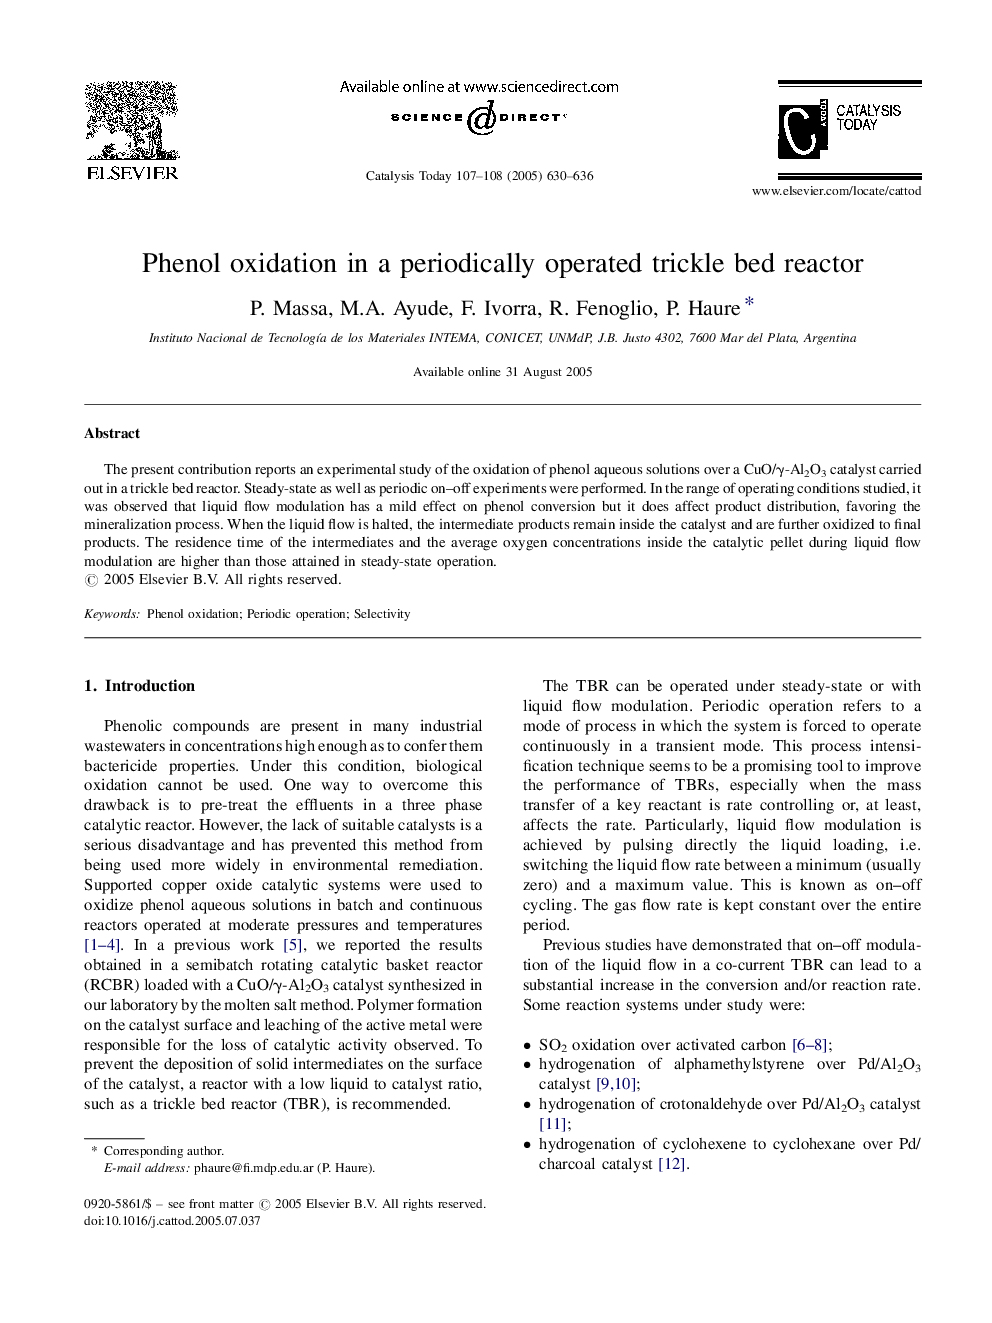 Phenol oxidation in a periodically operated trickle bed reactor